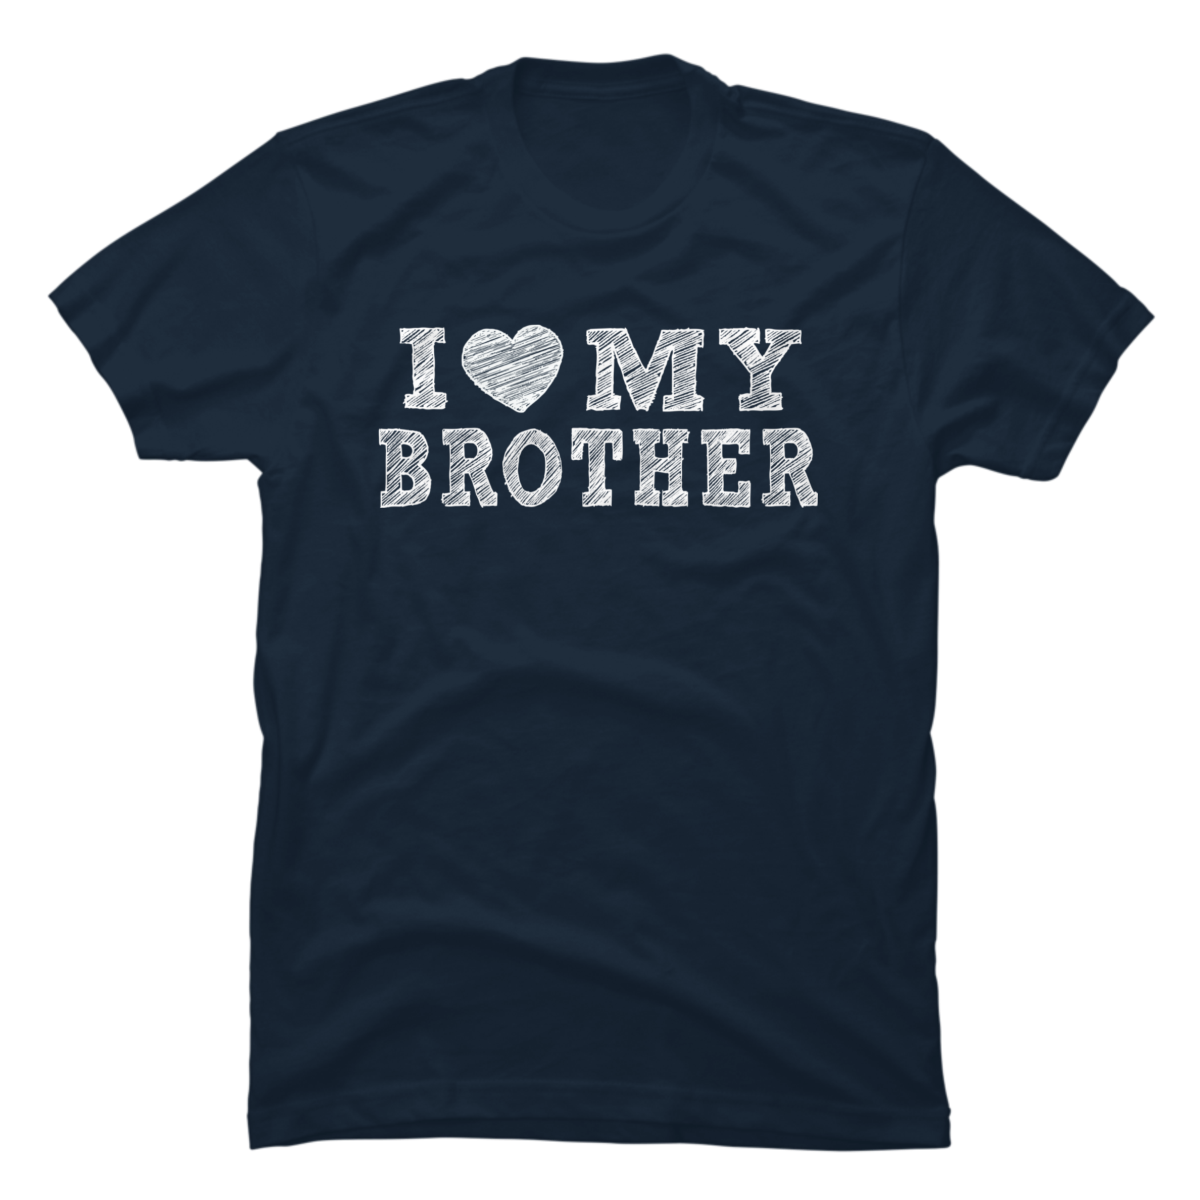 i love my brother - Buy t-shirt designs